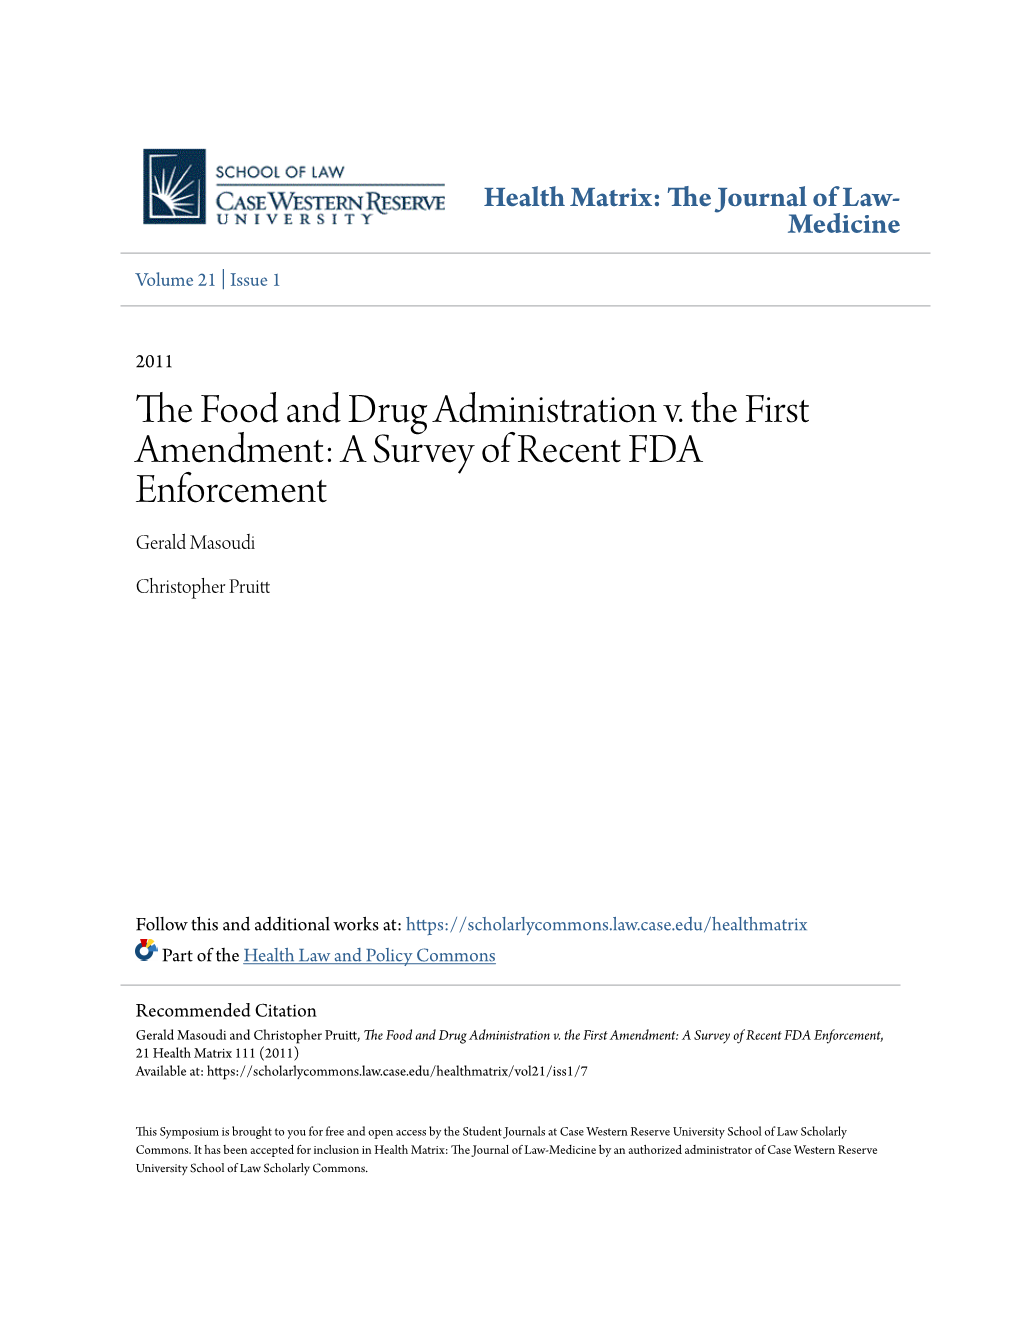 The Food and Drug Administration V. the First Amendment